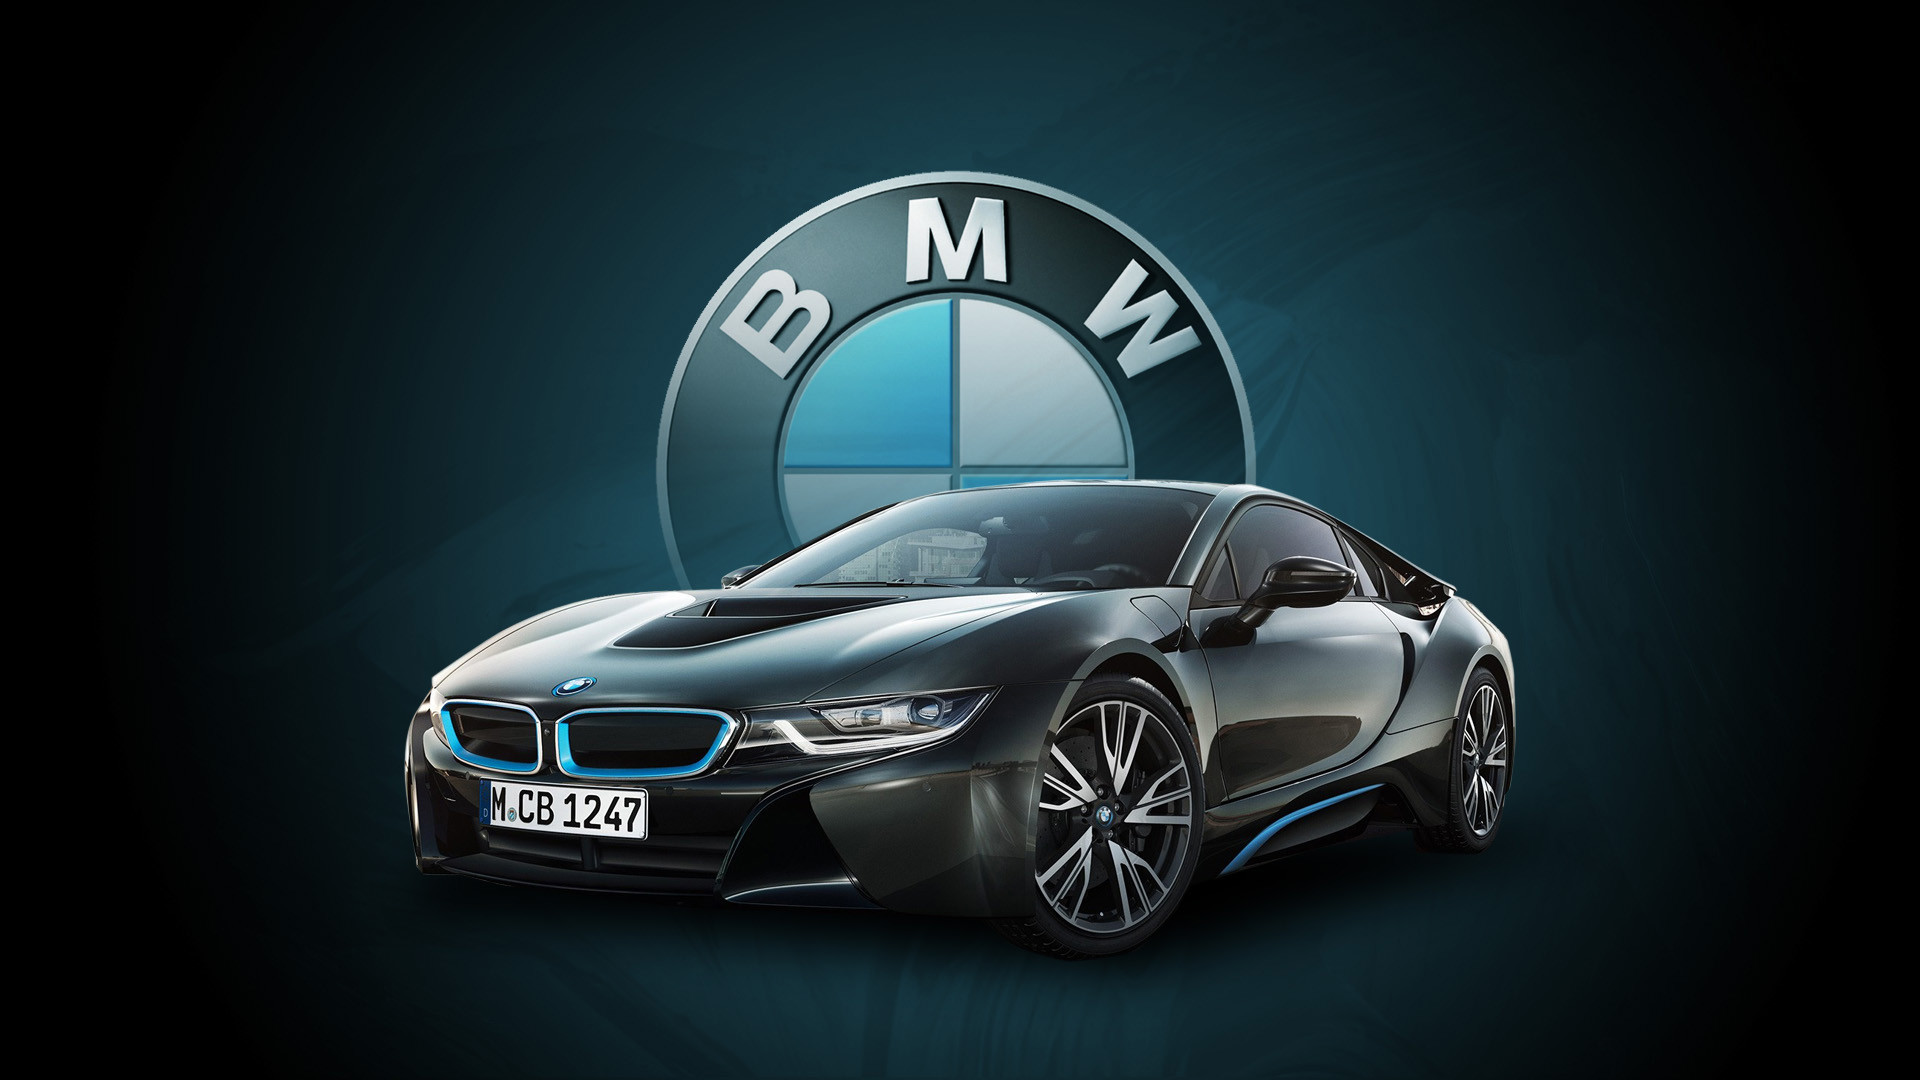 1920x1080 Bmw i8 pictures.